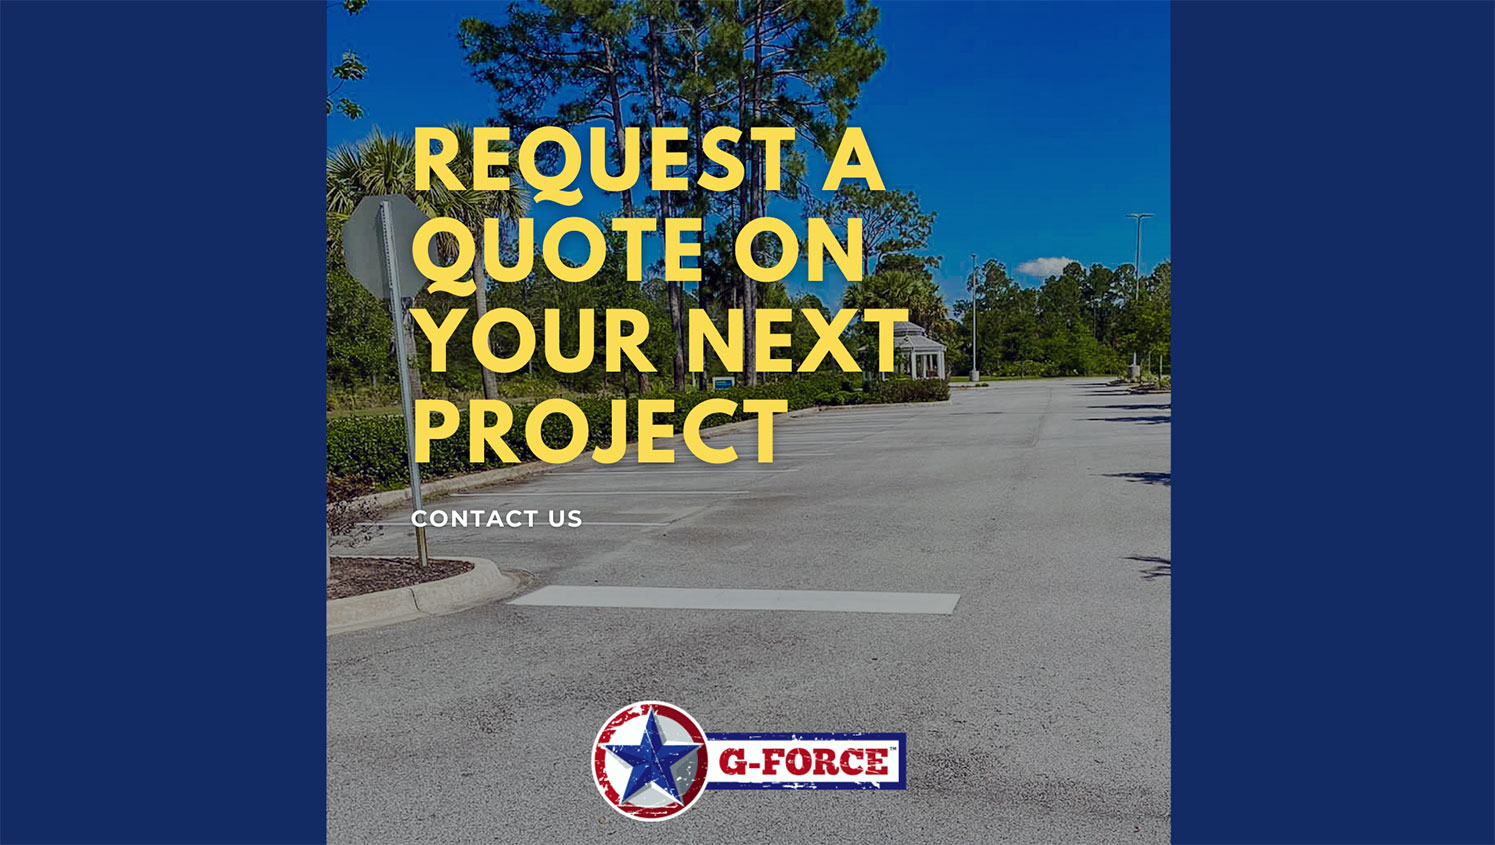 Request a new project quote at G-FORCE™ Orlando